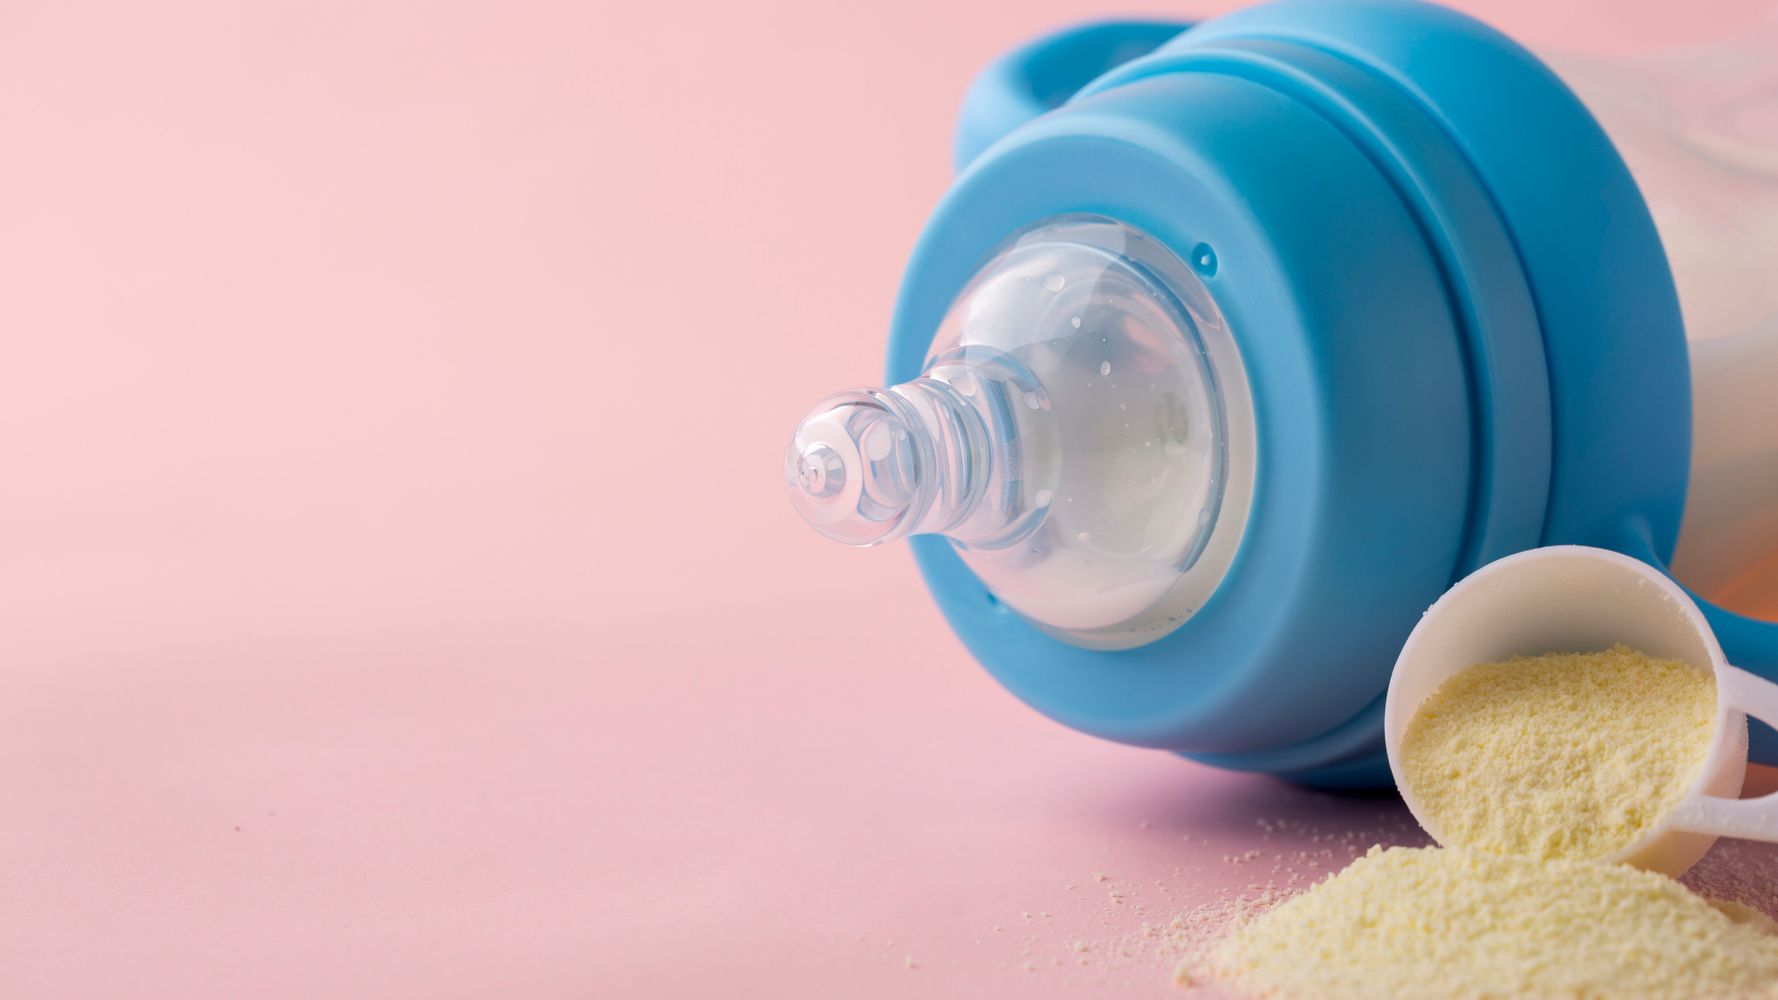 Can't Find Baby Formula During The Shortage? Here's What To Do (And Not Do).